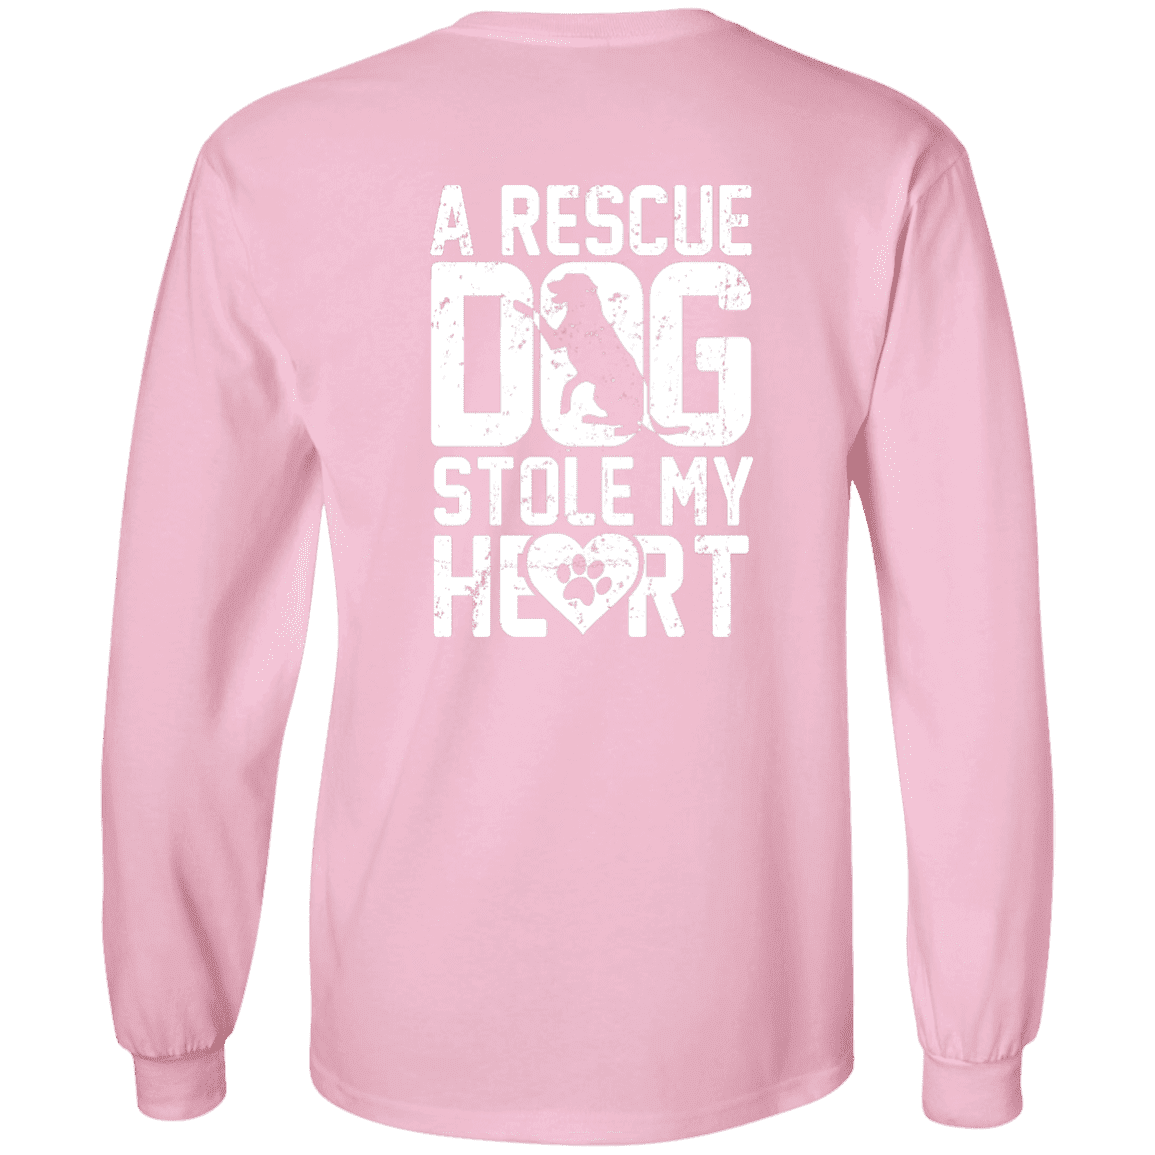 A Rescue Dog Stole My Heart - Long Sleeve T Shirt.